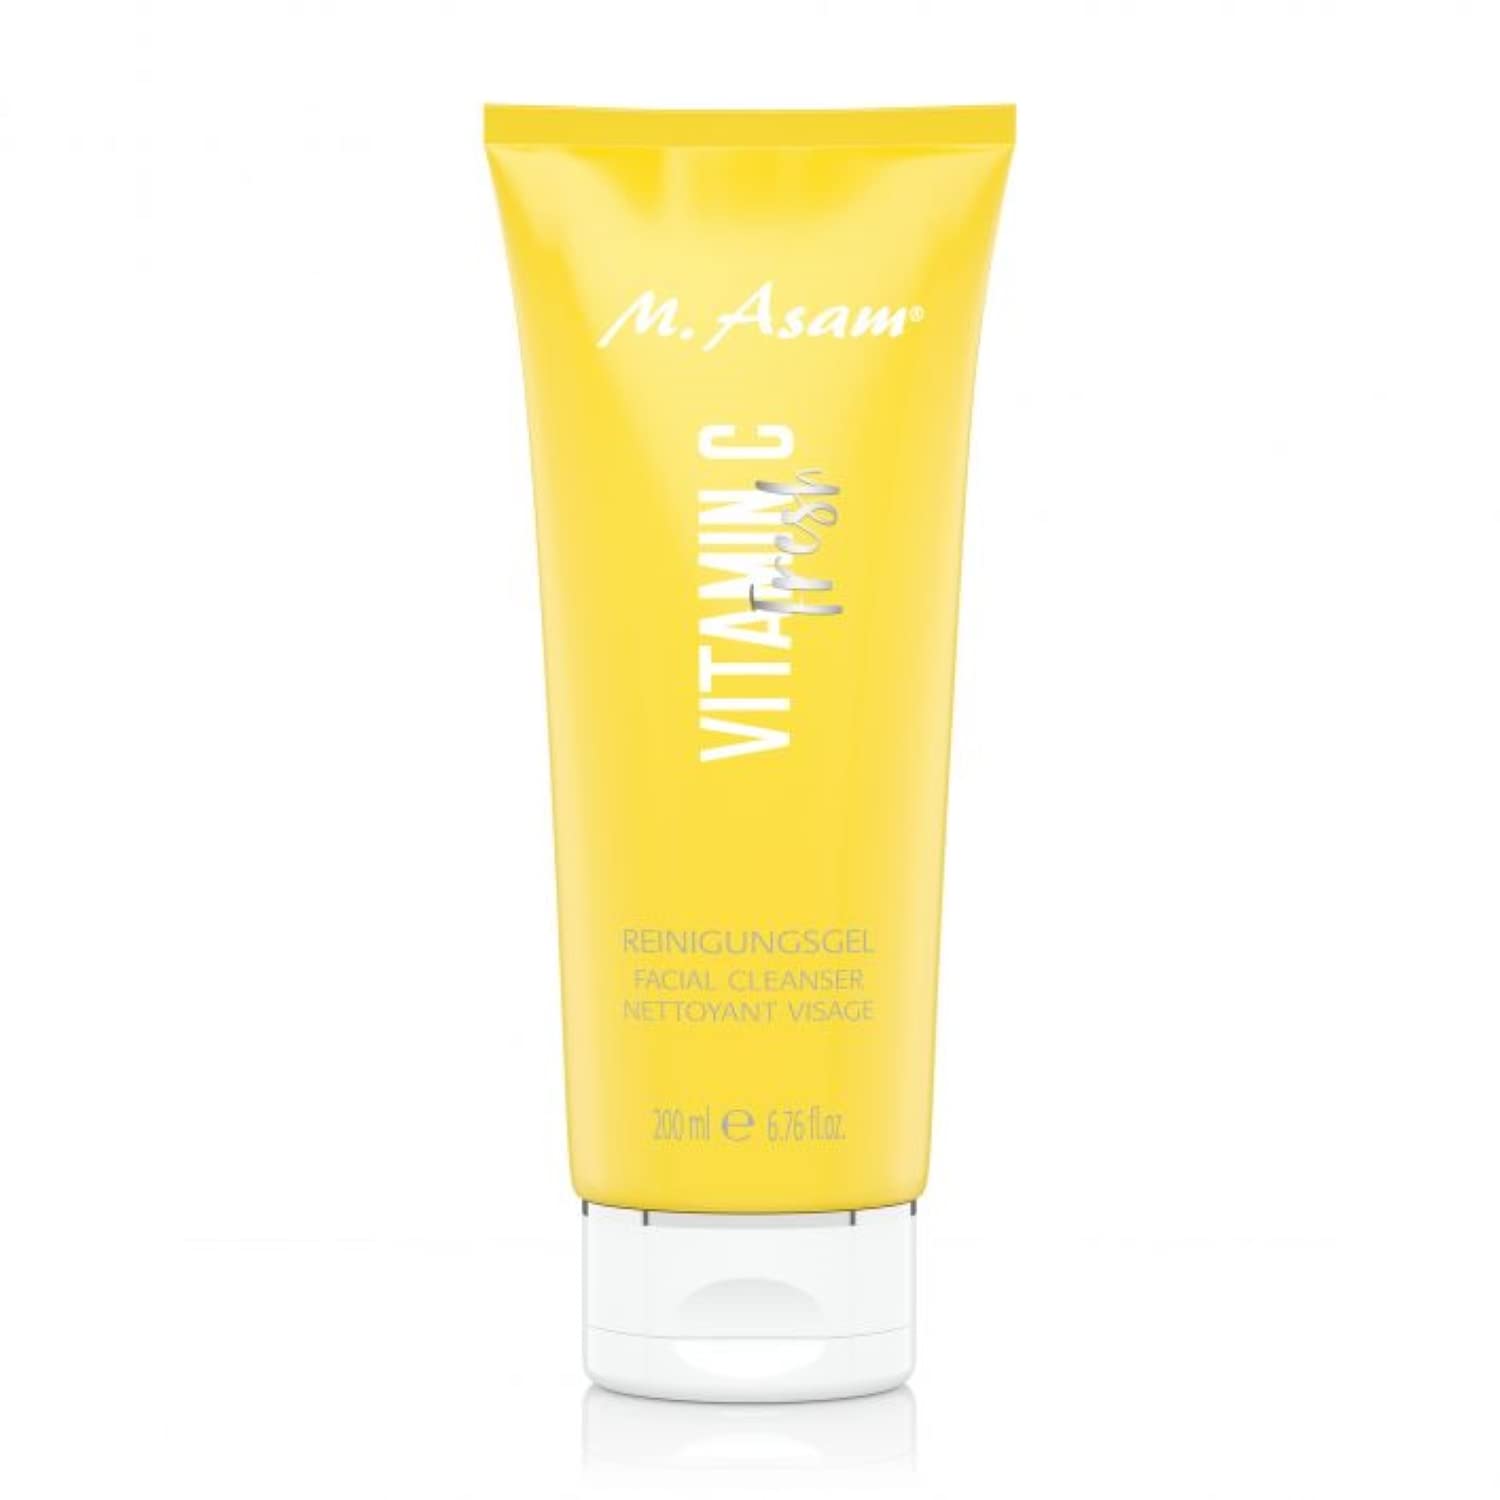 M. Asam Vitamin C Cleansing Gel Fresh (200 ml) - Mild Cleansing Gel Cleans Thoroughly Without Drying Out, Facial Cleansing with Gentle Exfoliating Effect Refined & Vitalises